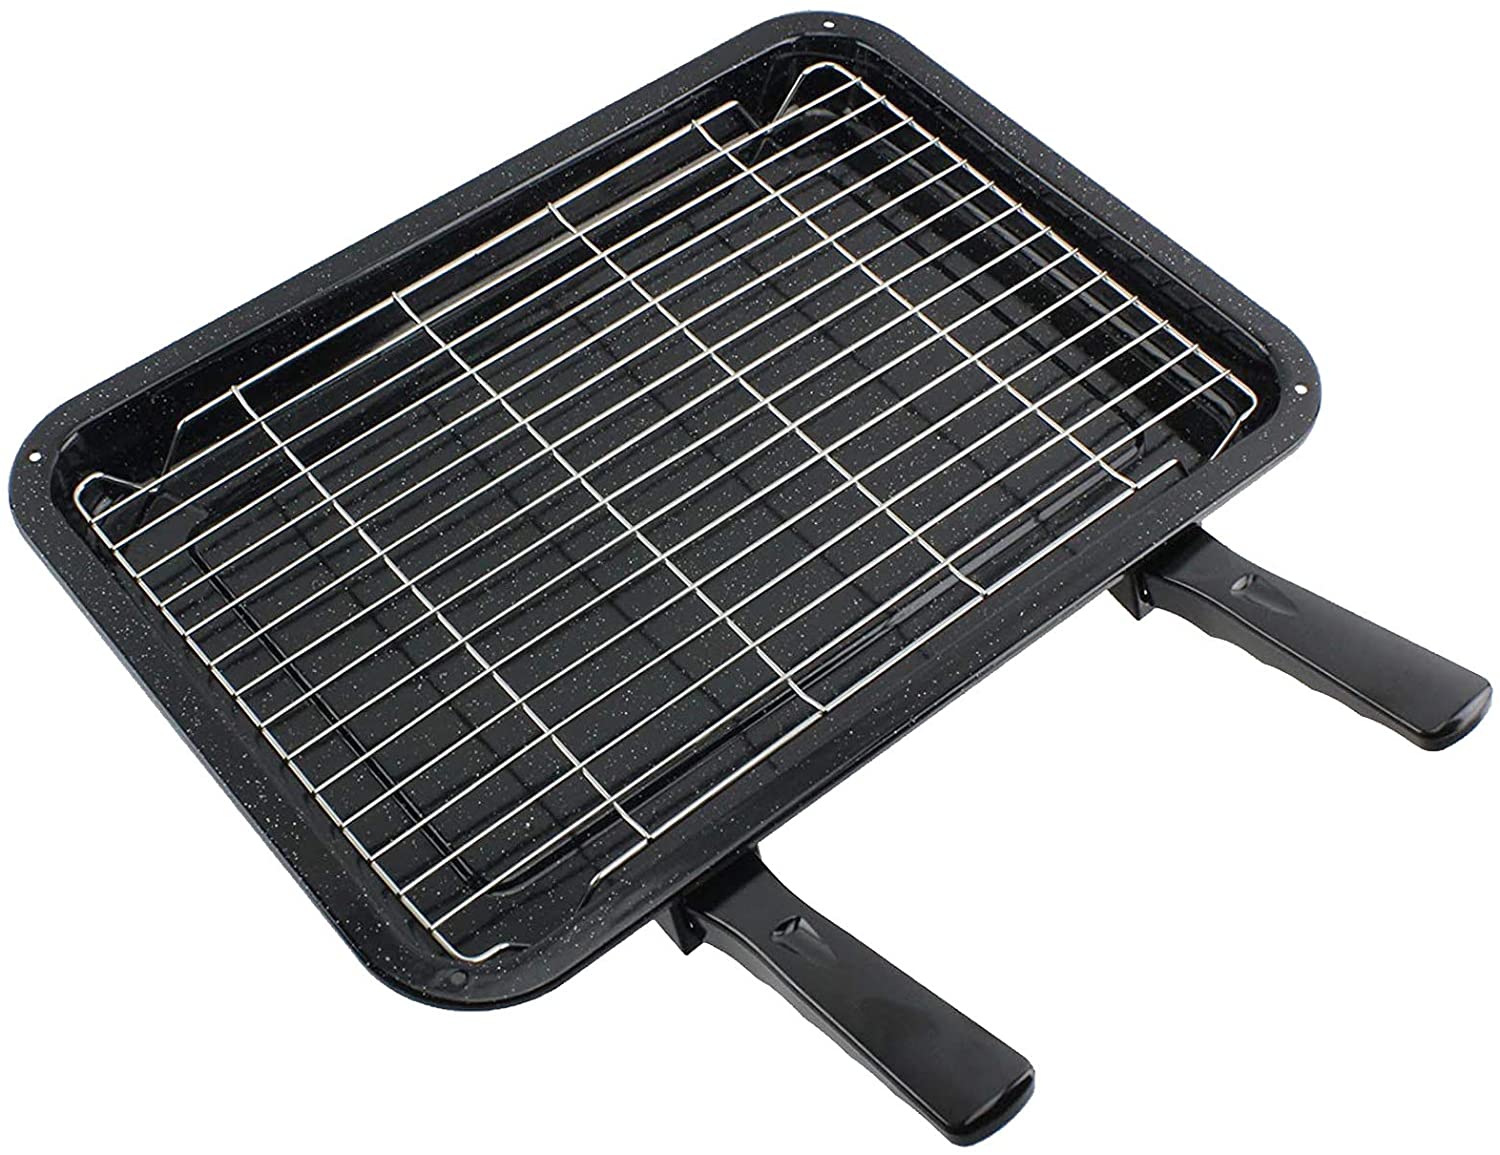 Medium Grill Pan, Rack & Dual Detachable Handles with Adjustable Shelf for HOTPOINT Oven Cookers